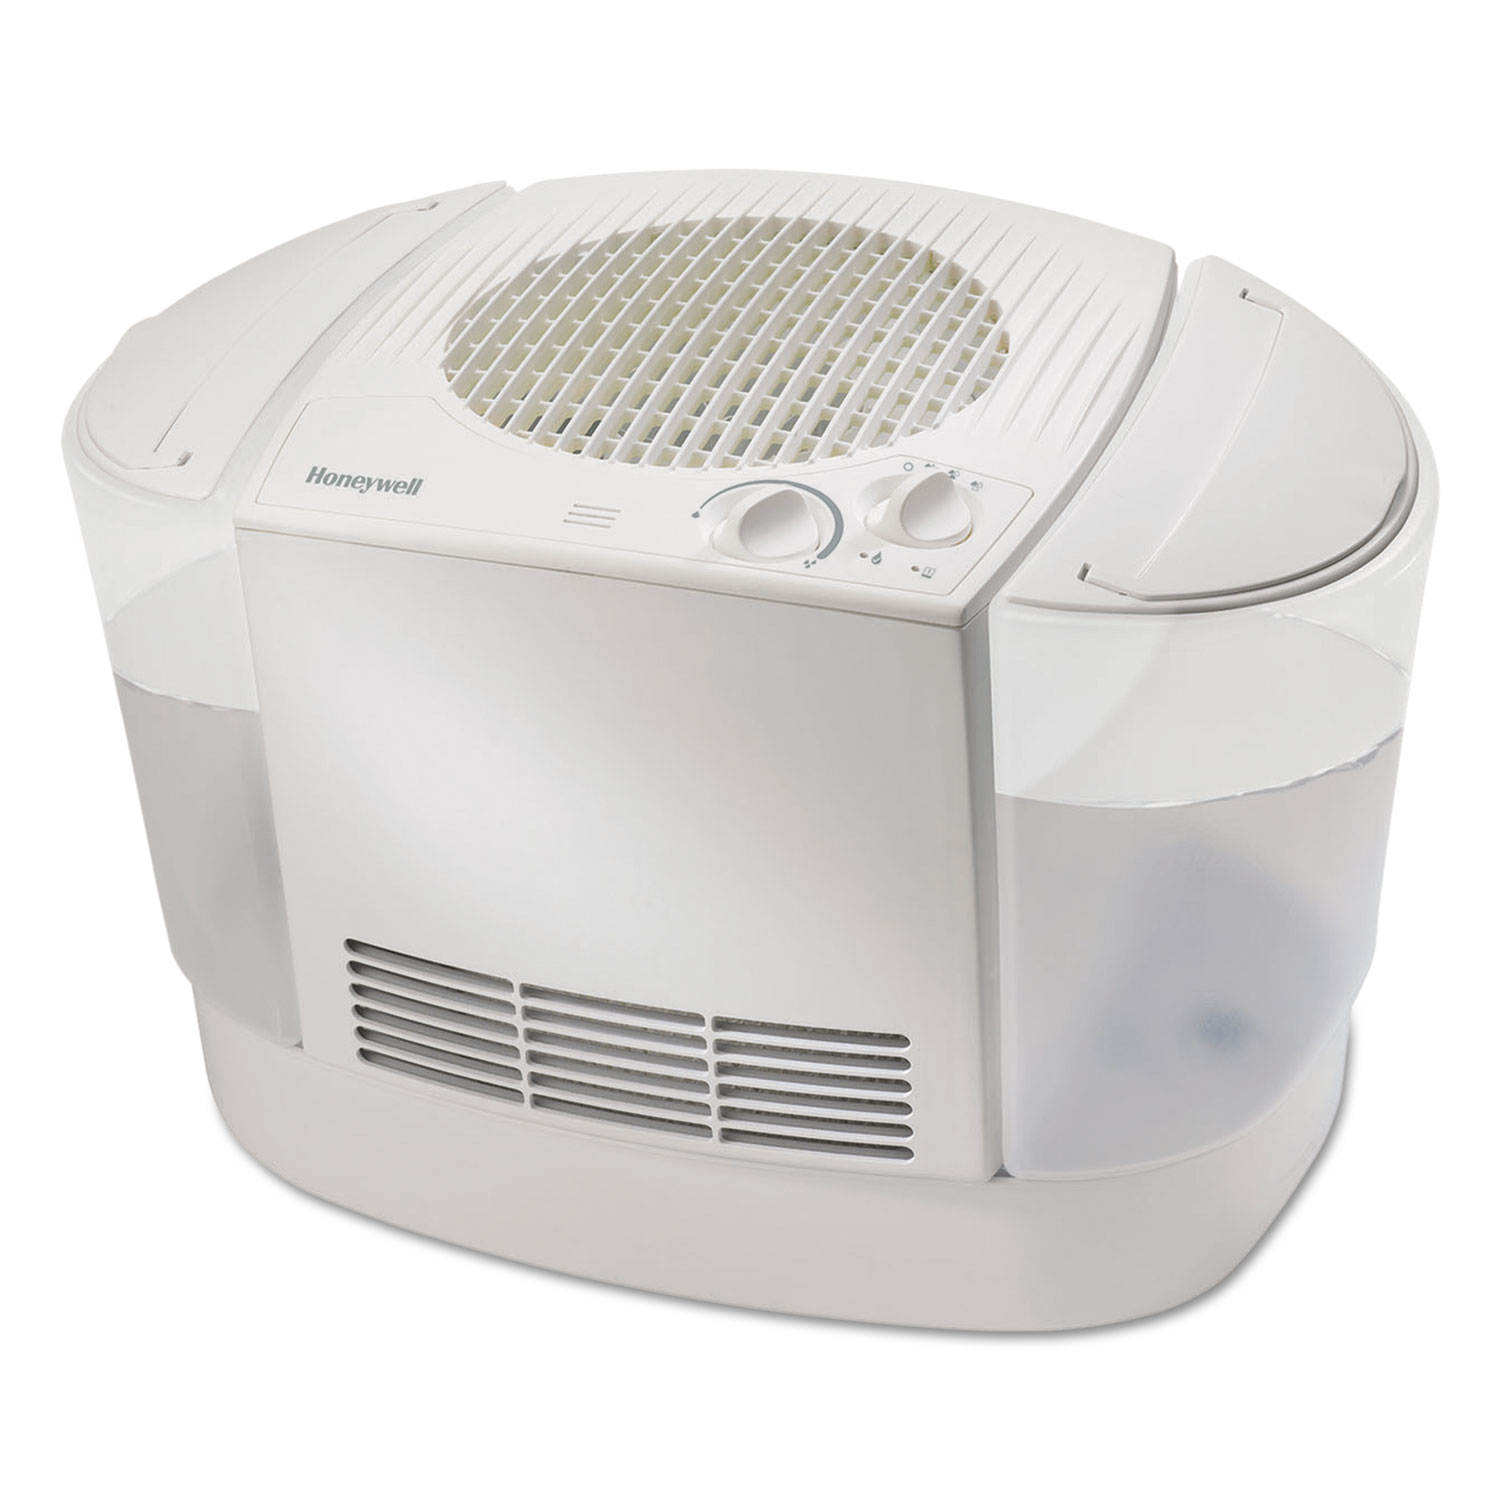 Console Top Fill Humidifier, White, 20 1/2w x 13 1/2d x 11 1/2h